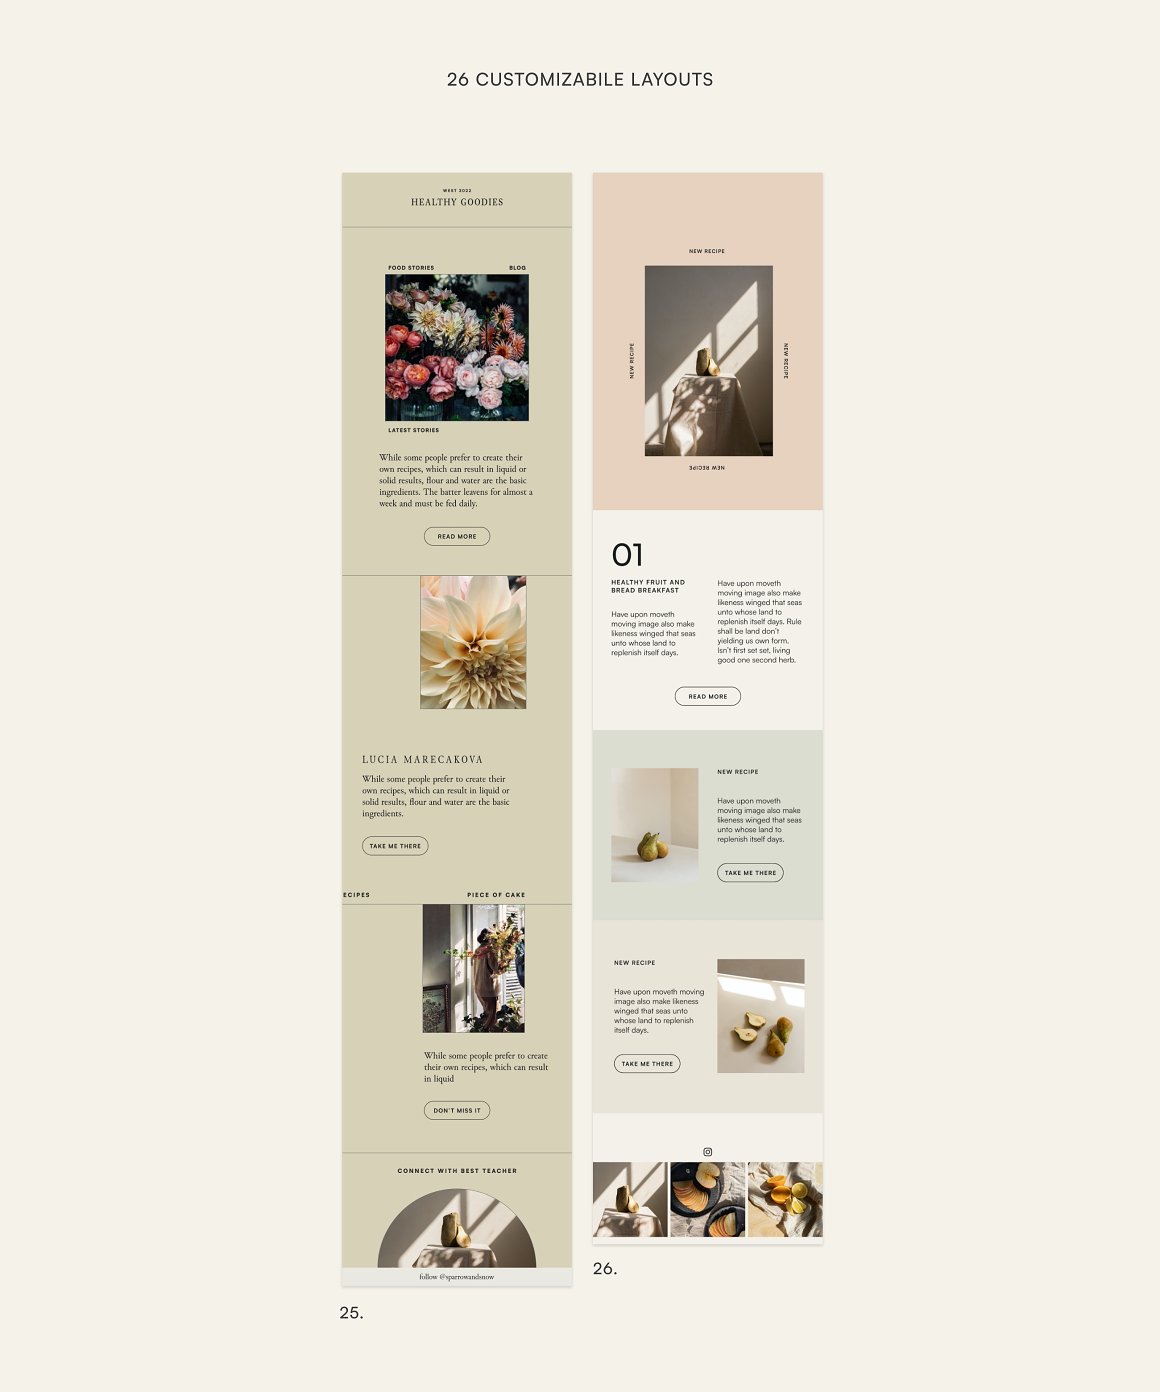 Set of images of adorable email design templates.